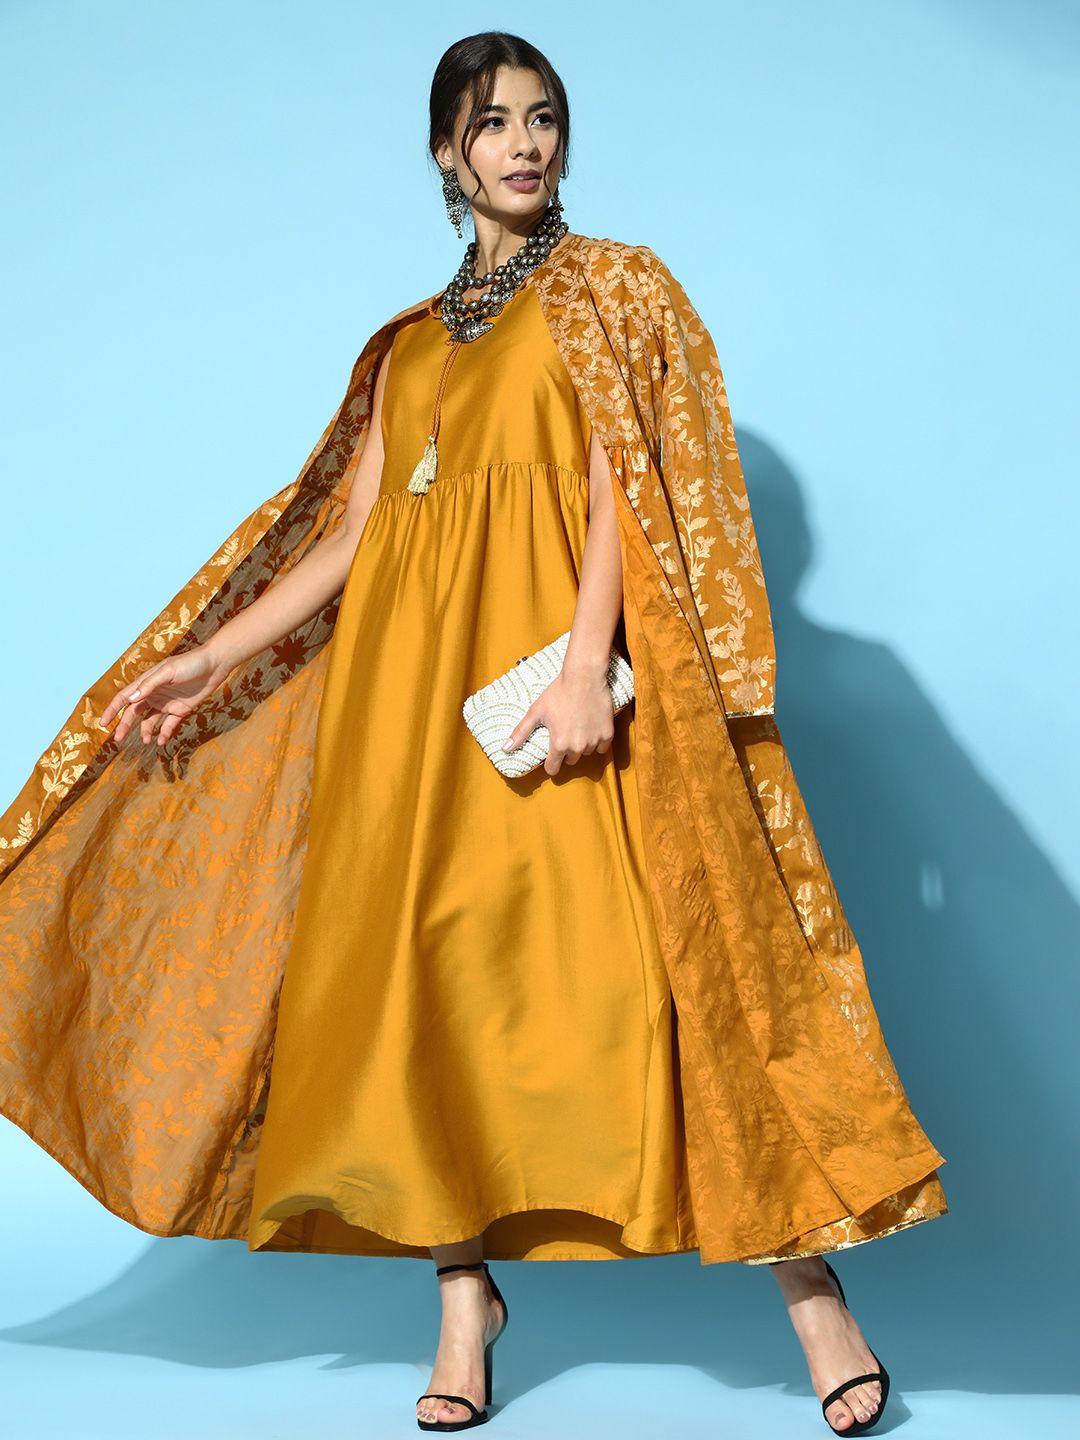 all-about-you-mustard-yellow-&-golden-ethnic-motifs-print-maxi-dress-with-longline-jacket